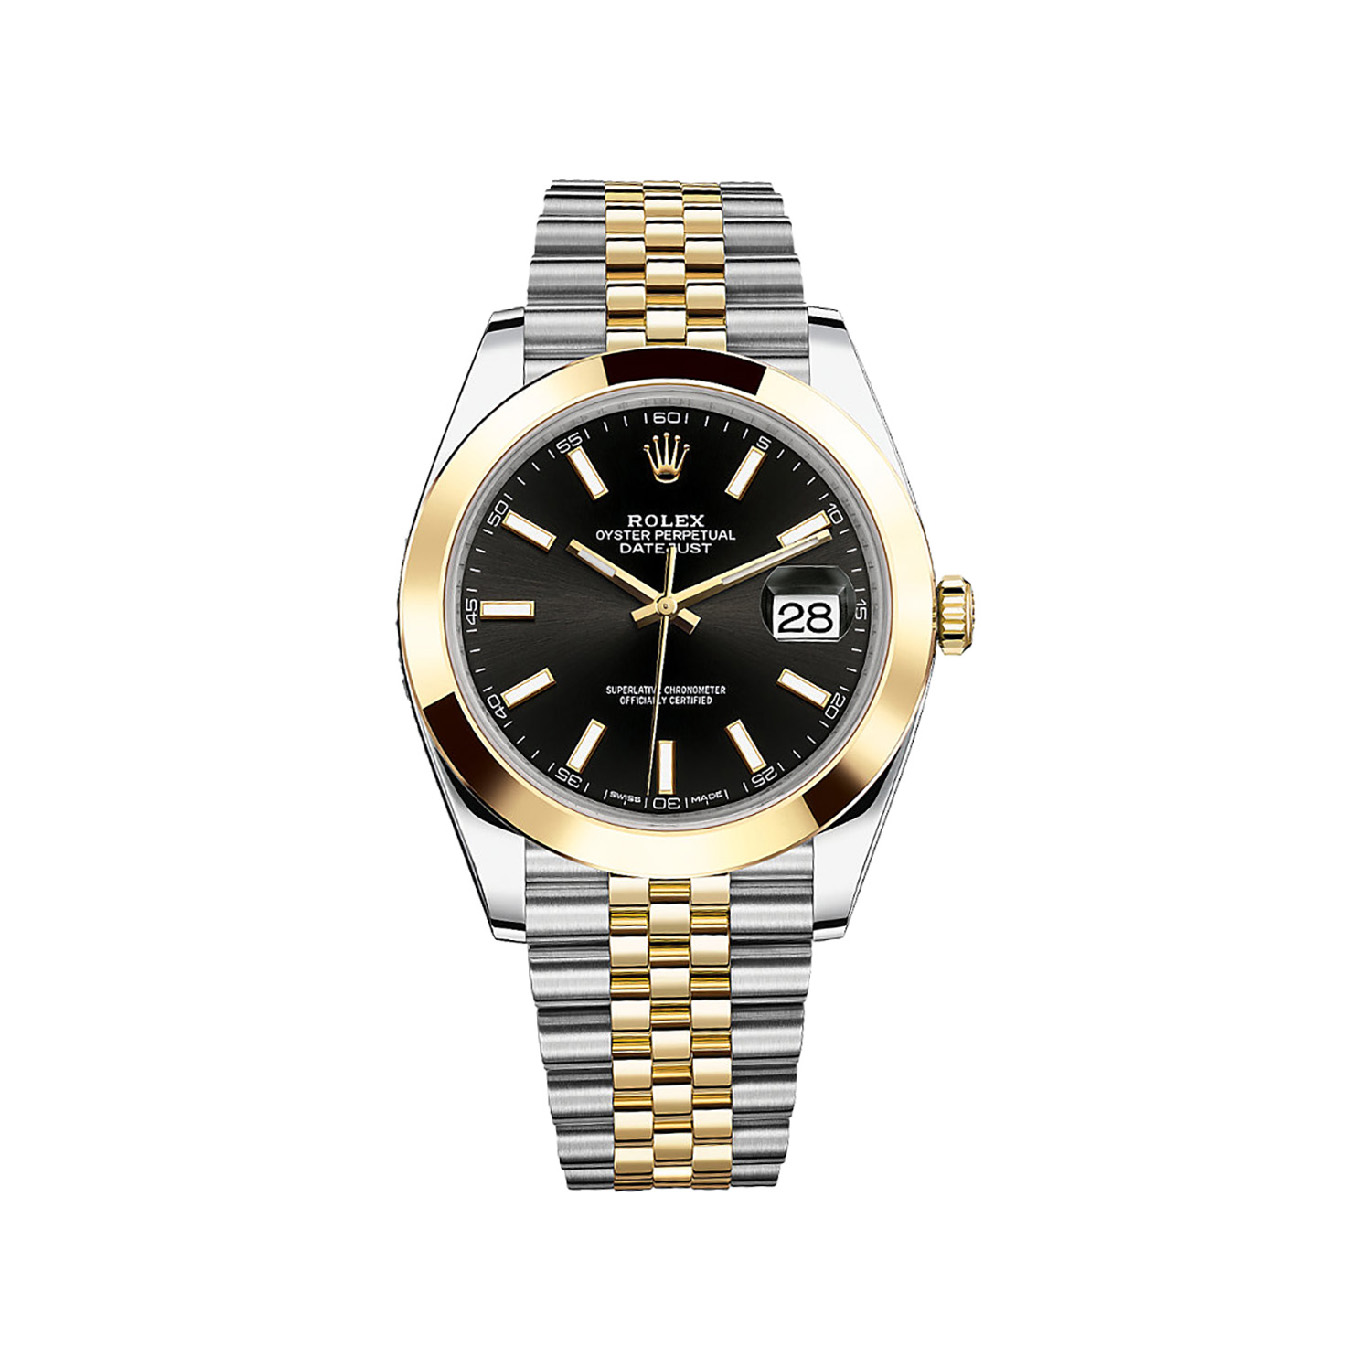 Datejust 41 126303 Gold & Stainless Steel Watch (Black) - Click Image to Close